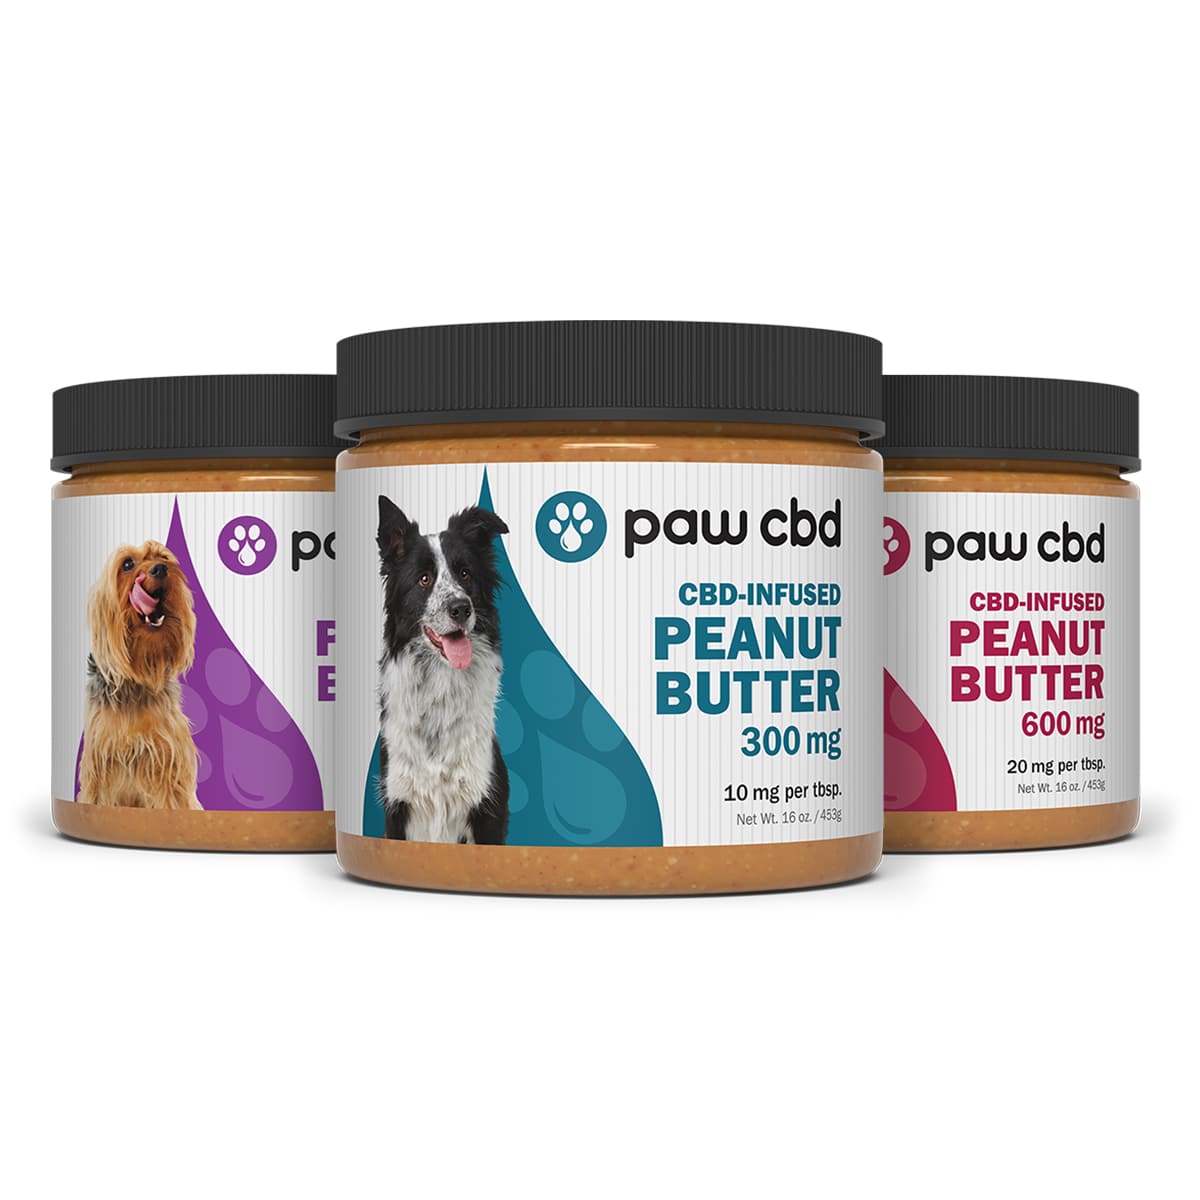 cbdMD Paw CBD Peanut Butter for Dogs - Review